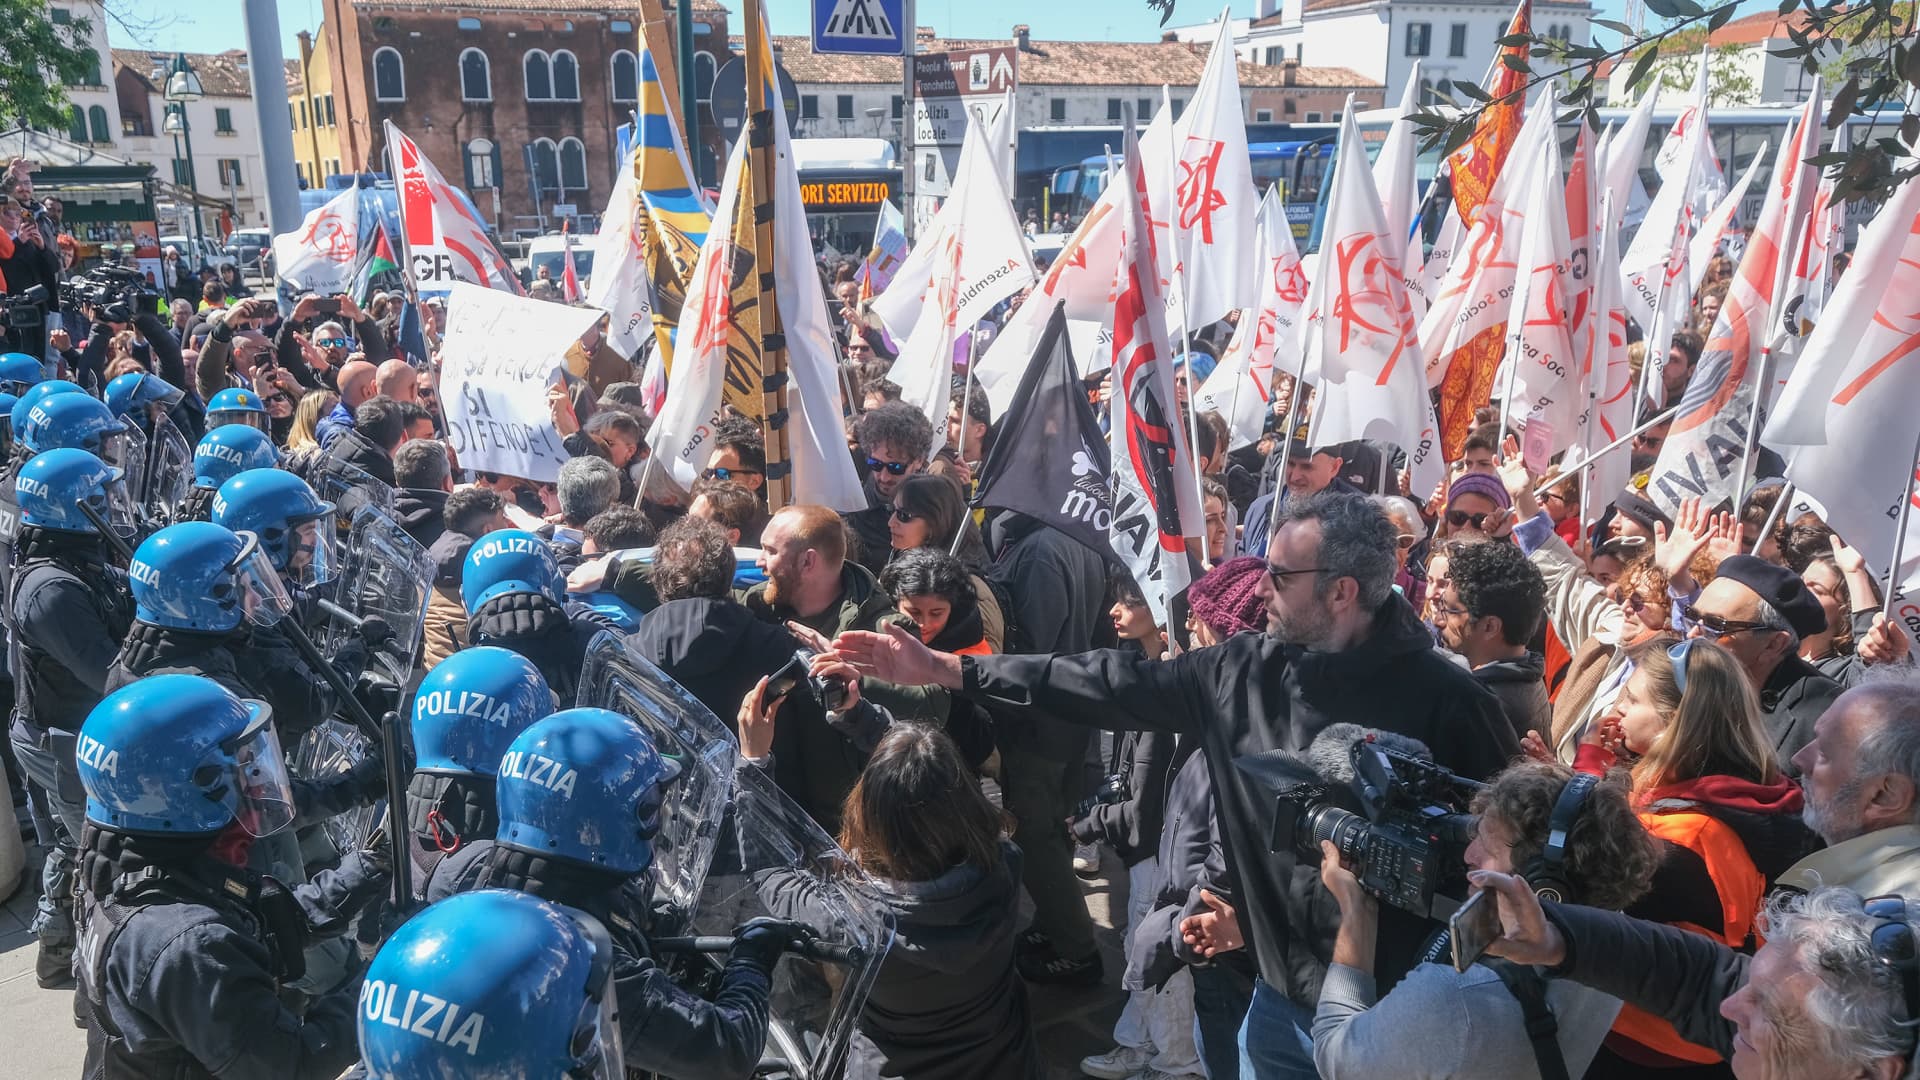 Venice residents clash with riot police as city launches world’s first tourist entry fee